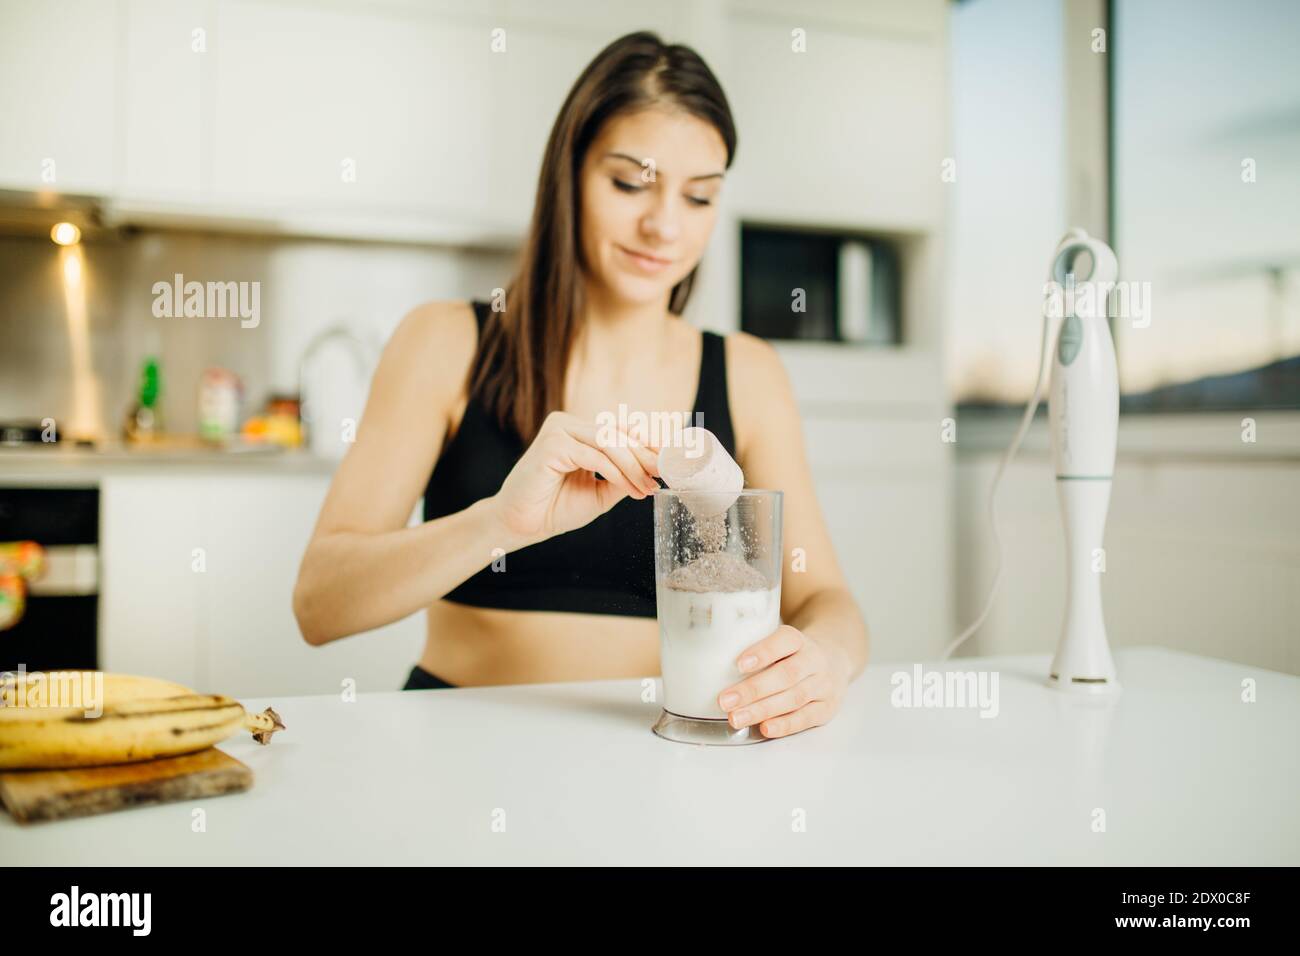 Woman with immersion blender making banana chocolate protein powder milkshake smoothie.Adding a scoop of low carb whey protein mix to shake after a ho Stock Photo